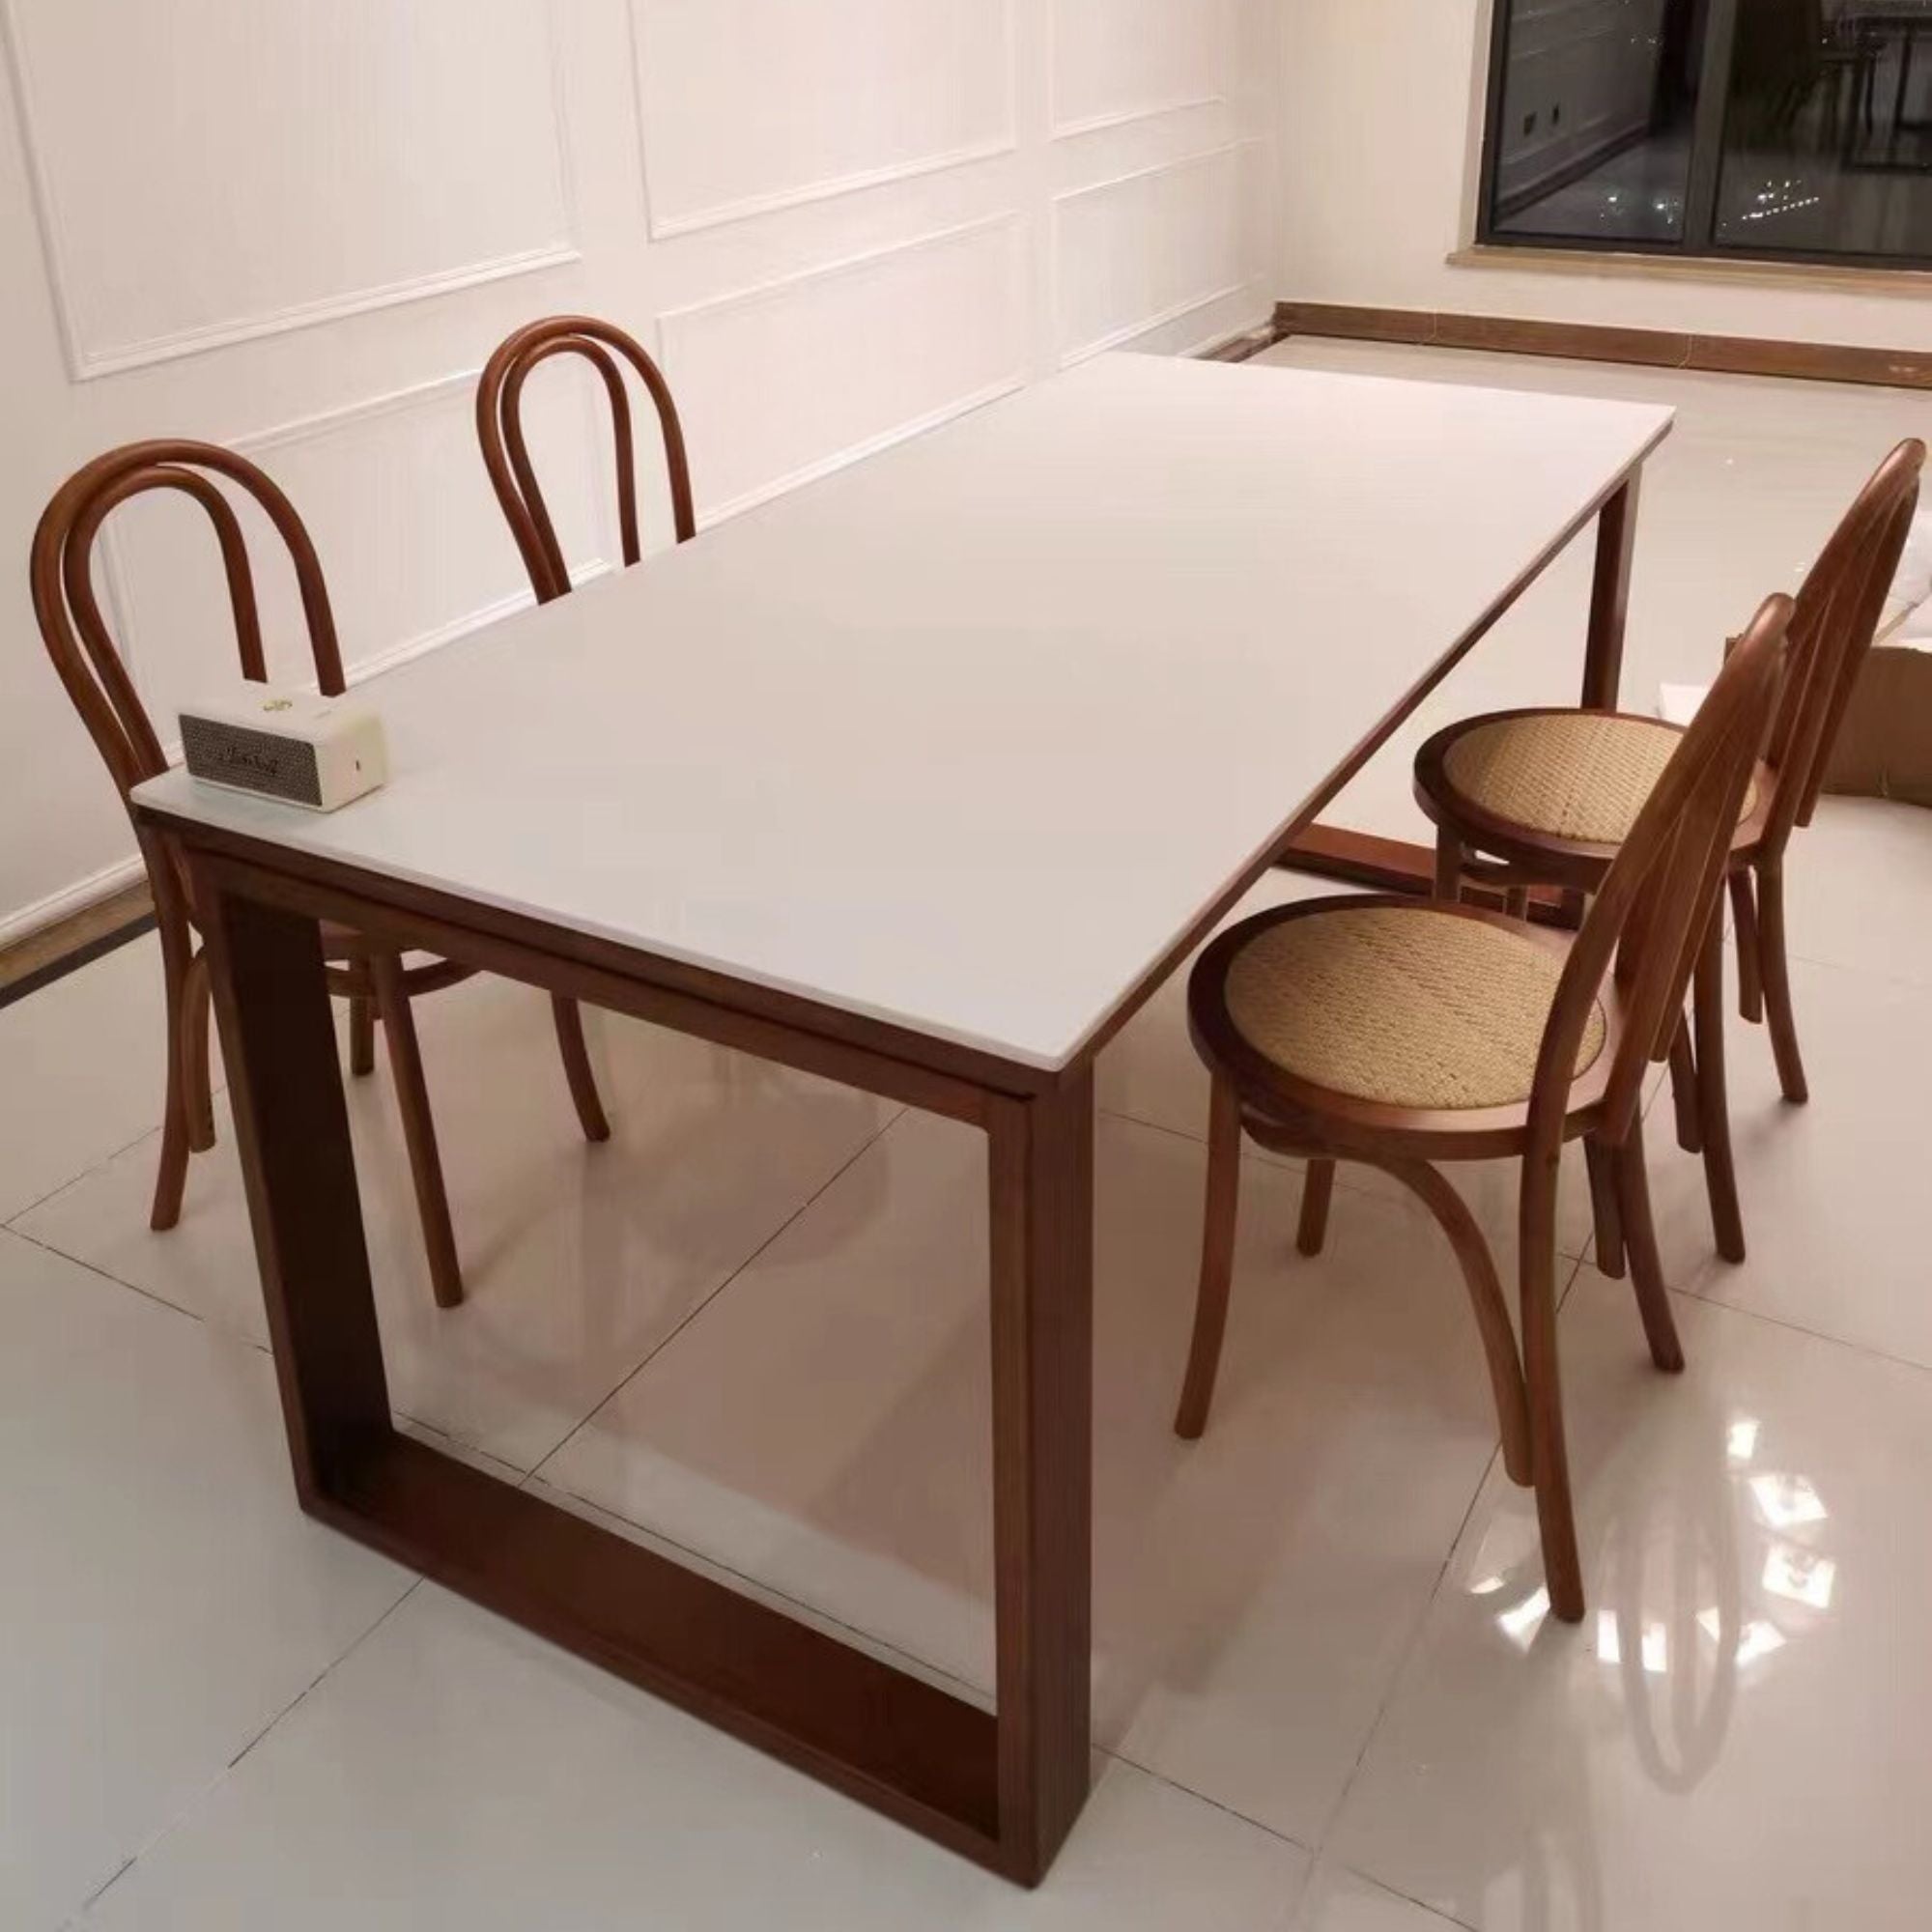 Tanner white sintered stone dining table in dining room